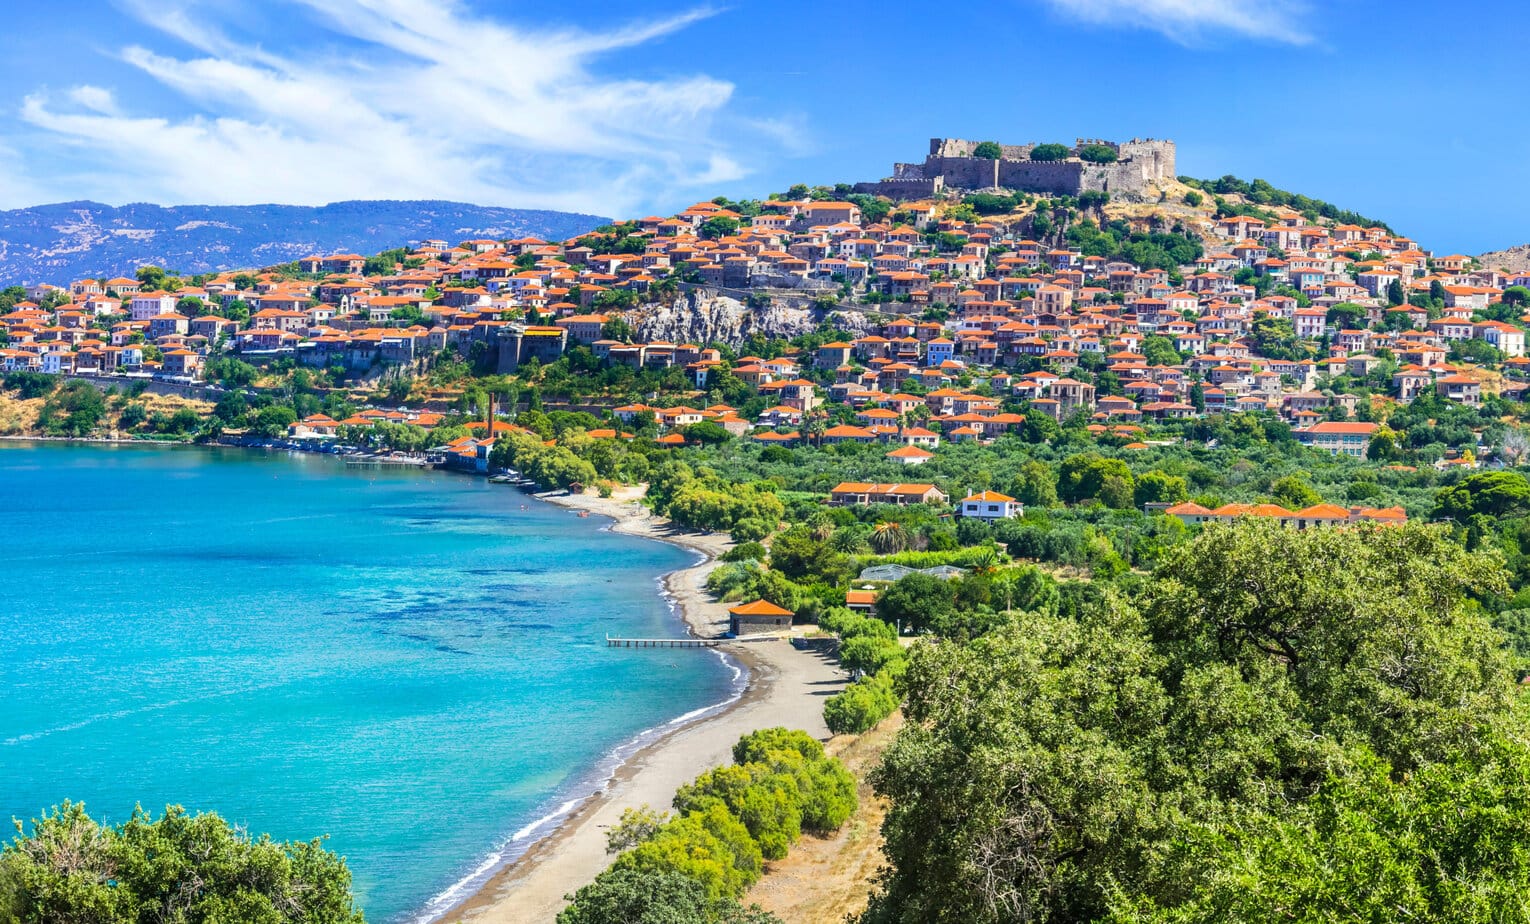 aerial view of Molyvos village in Lesvos with a curved bay and sandy beach next to turquoise water, the village is on the side of a hill beside the bay with a castle on top of the hill and red roofed buildings all around the side.